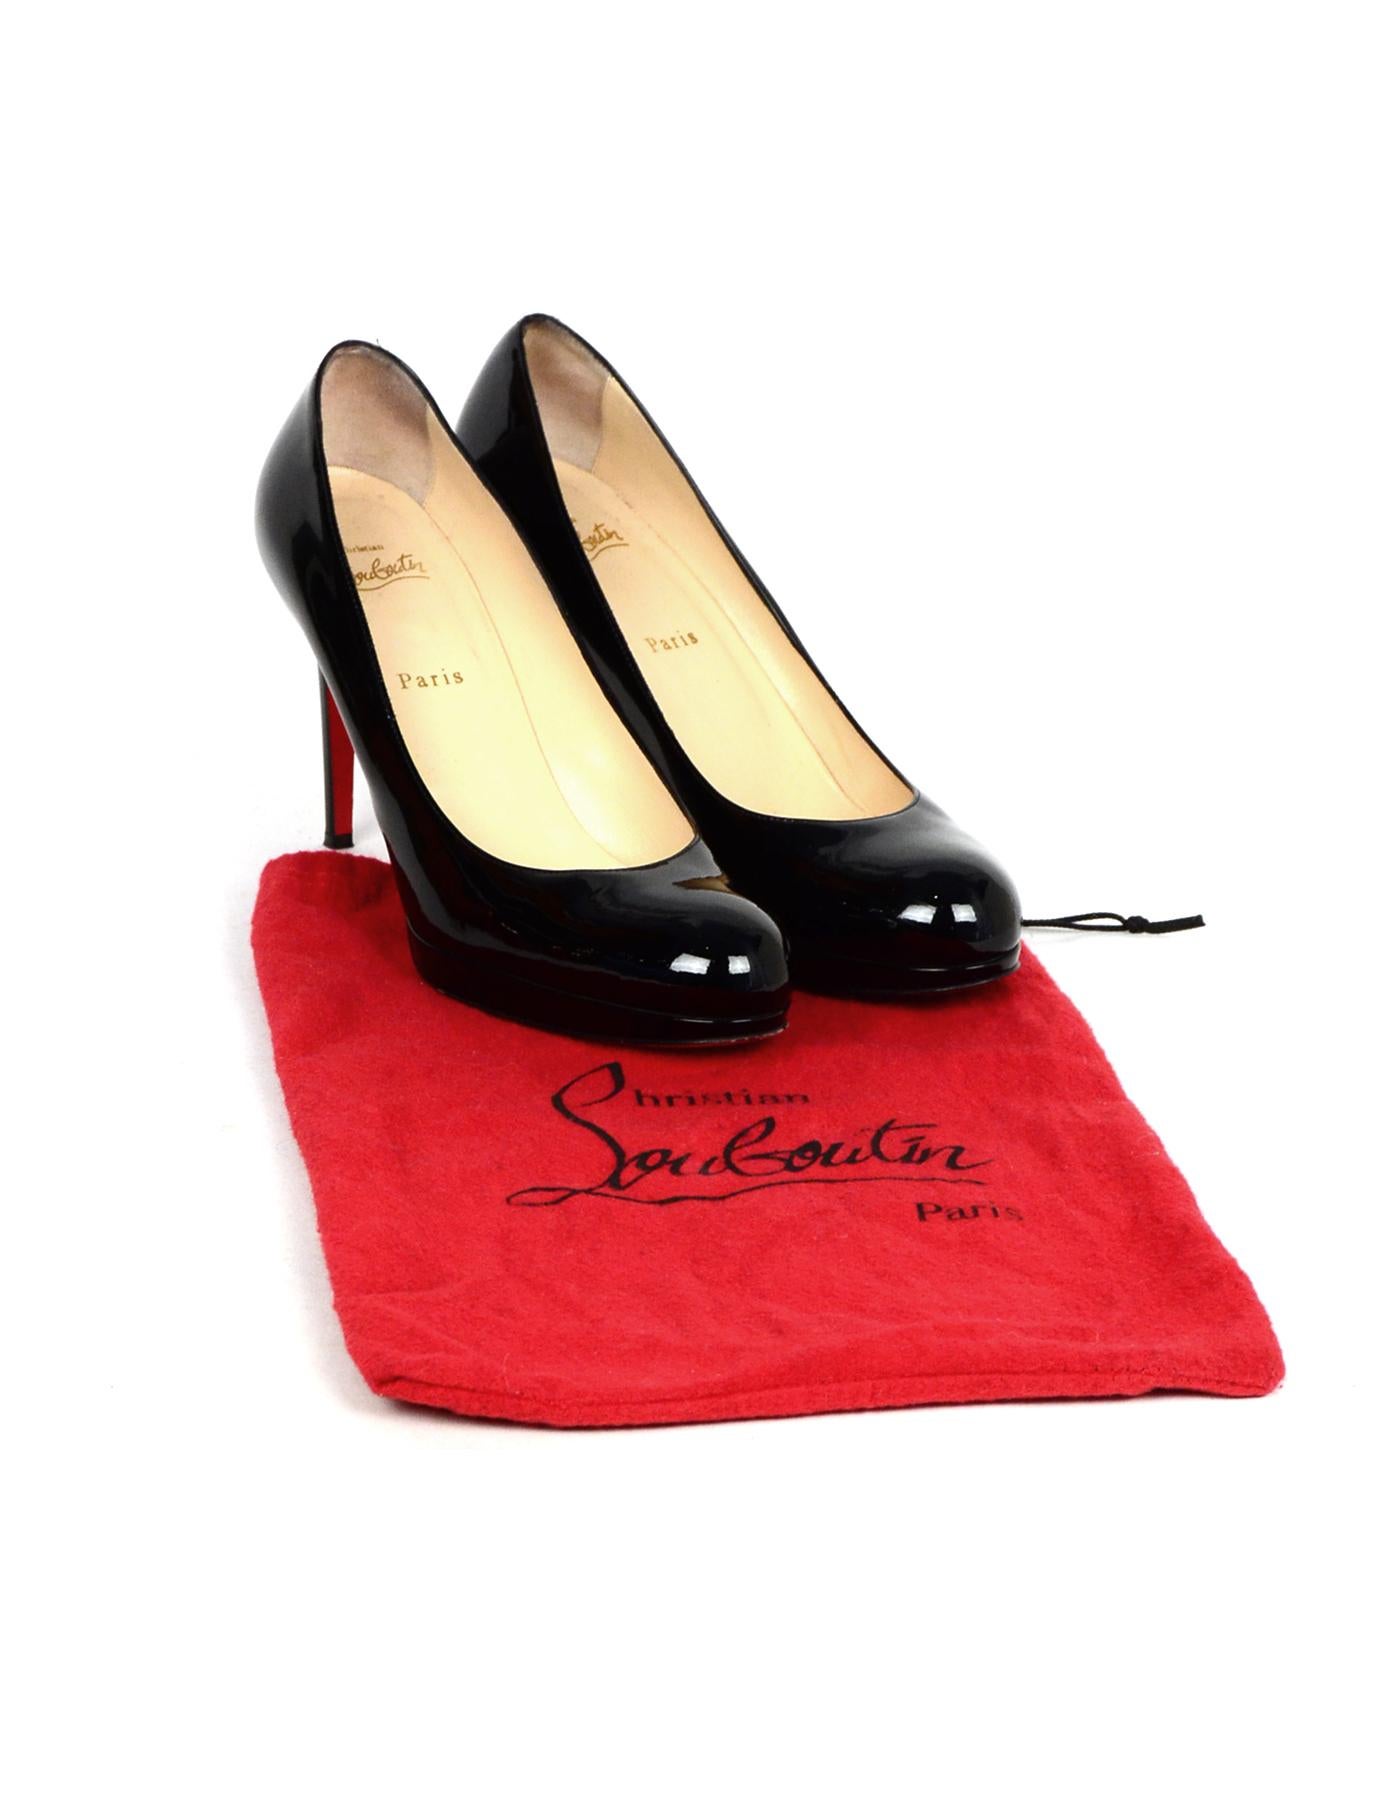 Christian Louboutin Black Patent Leather Simple Pump Sz 41 W/ DB

Made In: Italy
Color: Black
Materials: Patent leather
Closure/Opening: Slide on
Overall Condition: Excellent pre-owned condition with exception of some scuffing in patent leather